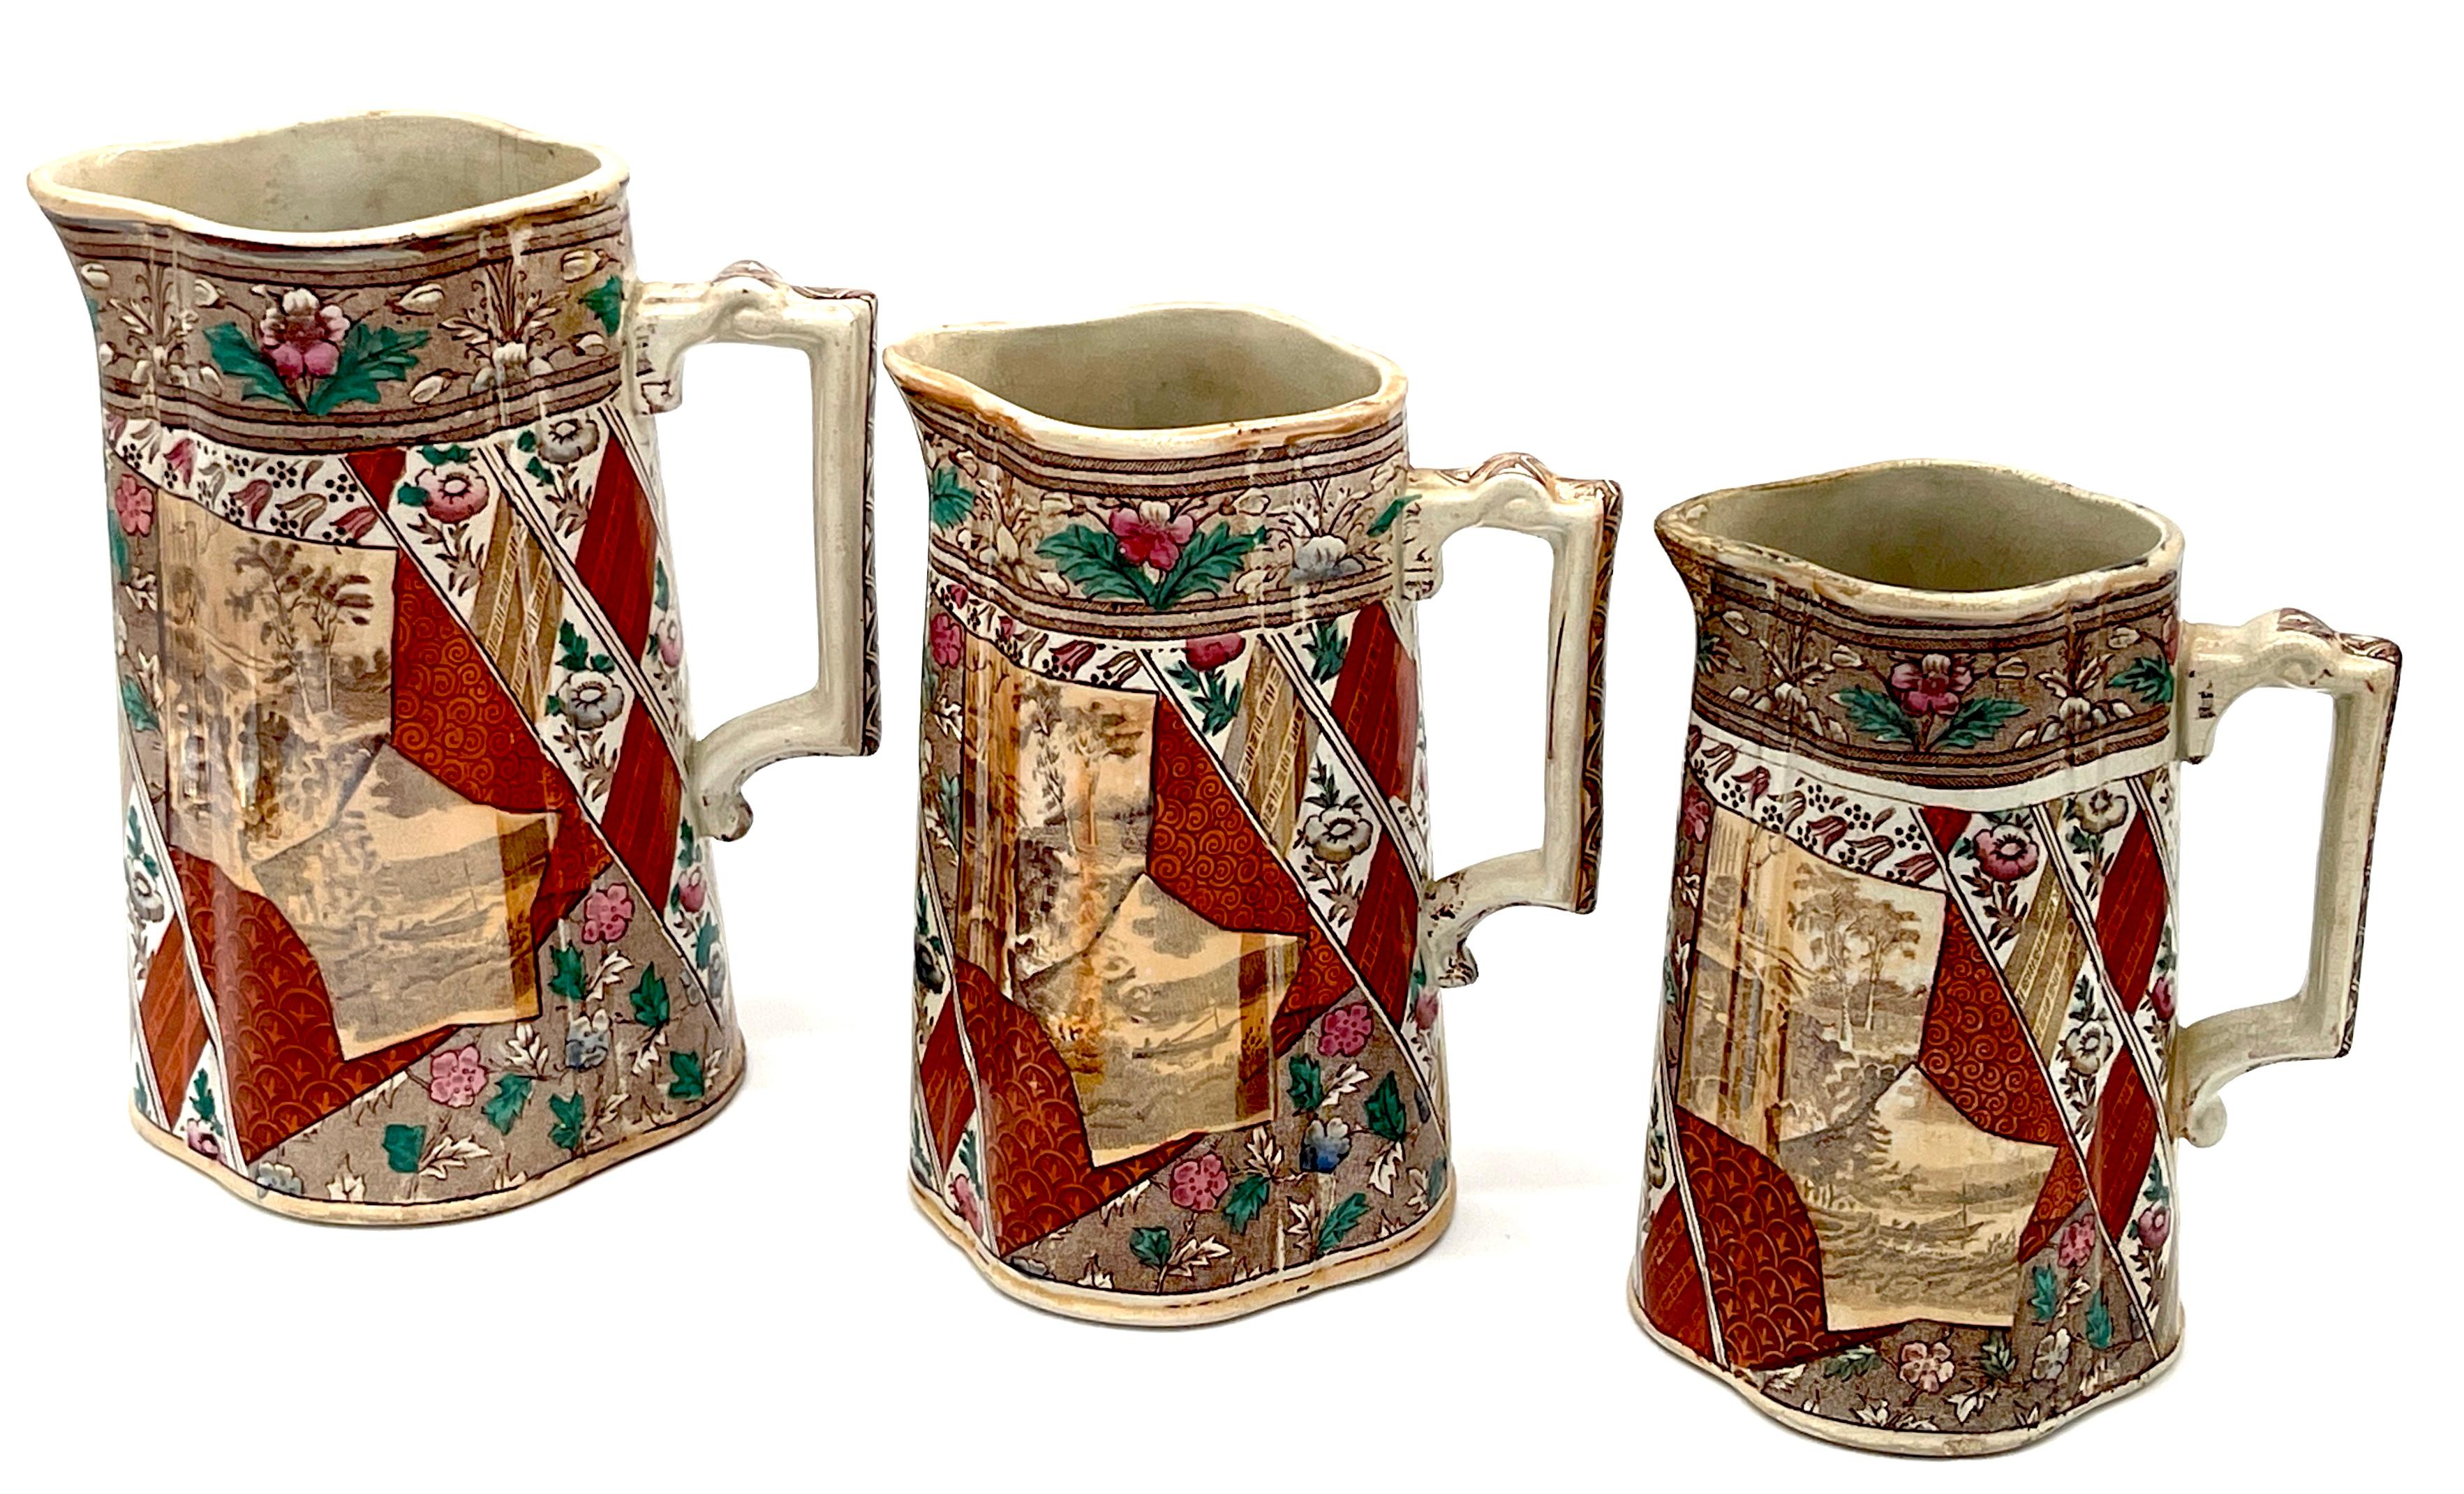 Set of 3 Graduating Scottish Aesthetic 'Views' Ironstone Pitchers, Circa 1875
By D. Methven & Sons

A captivating set of three graduating Scottish aesthetic 'Views' ironstone pitchers, circa 1875, crafted by D. Methven & Sons. These oval-shaped